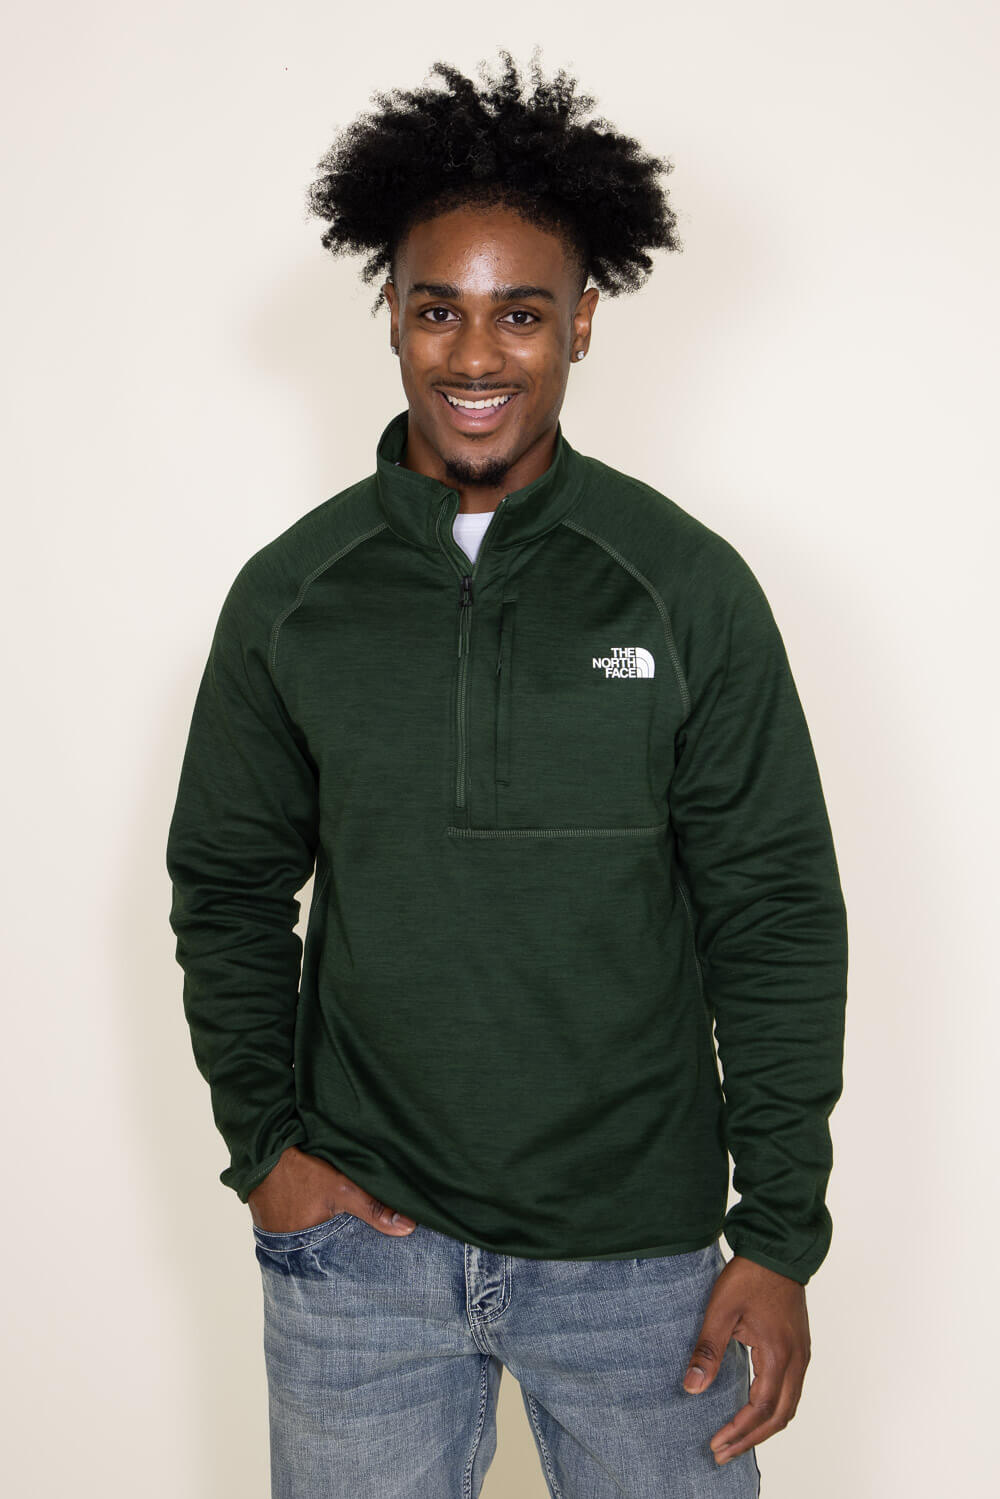 The North Face Canyonlands 1/2 Zip for Men in Pine | NF0A5G9W-JO3 – Glik's